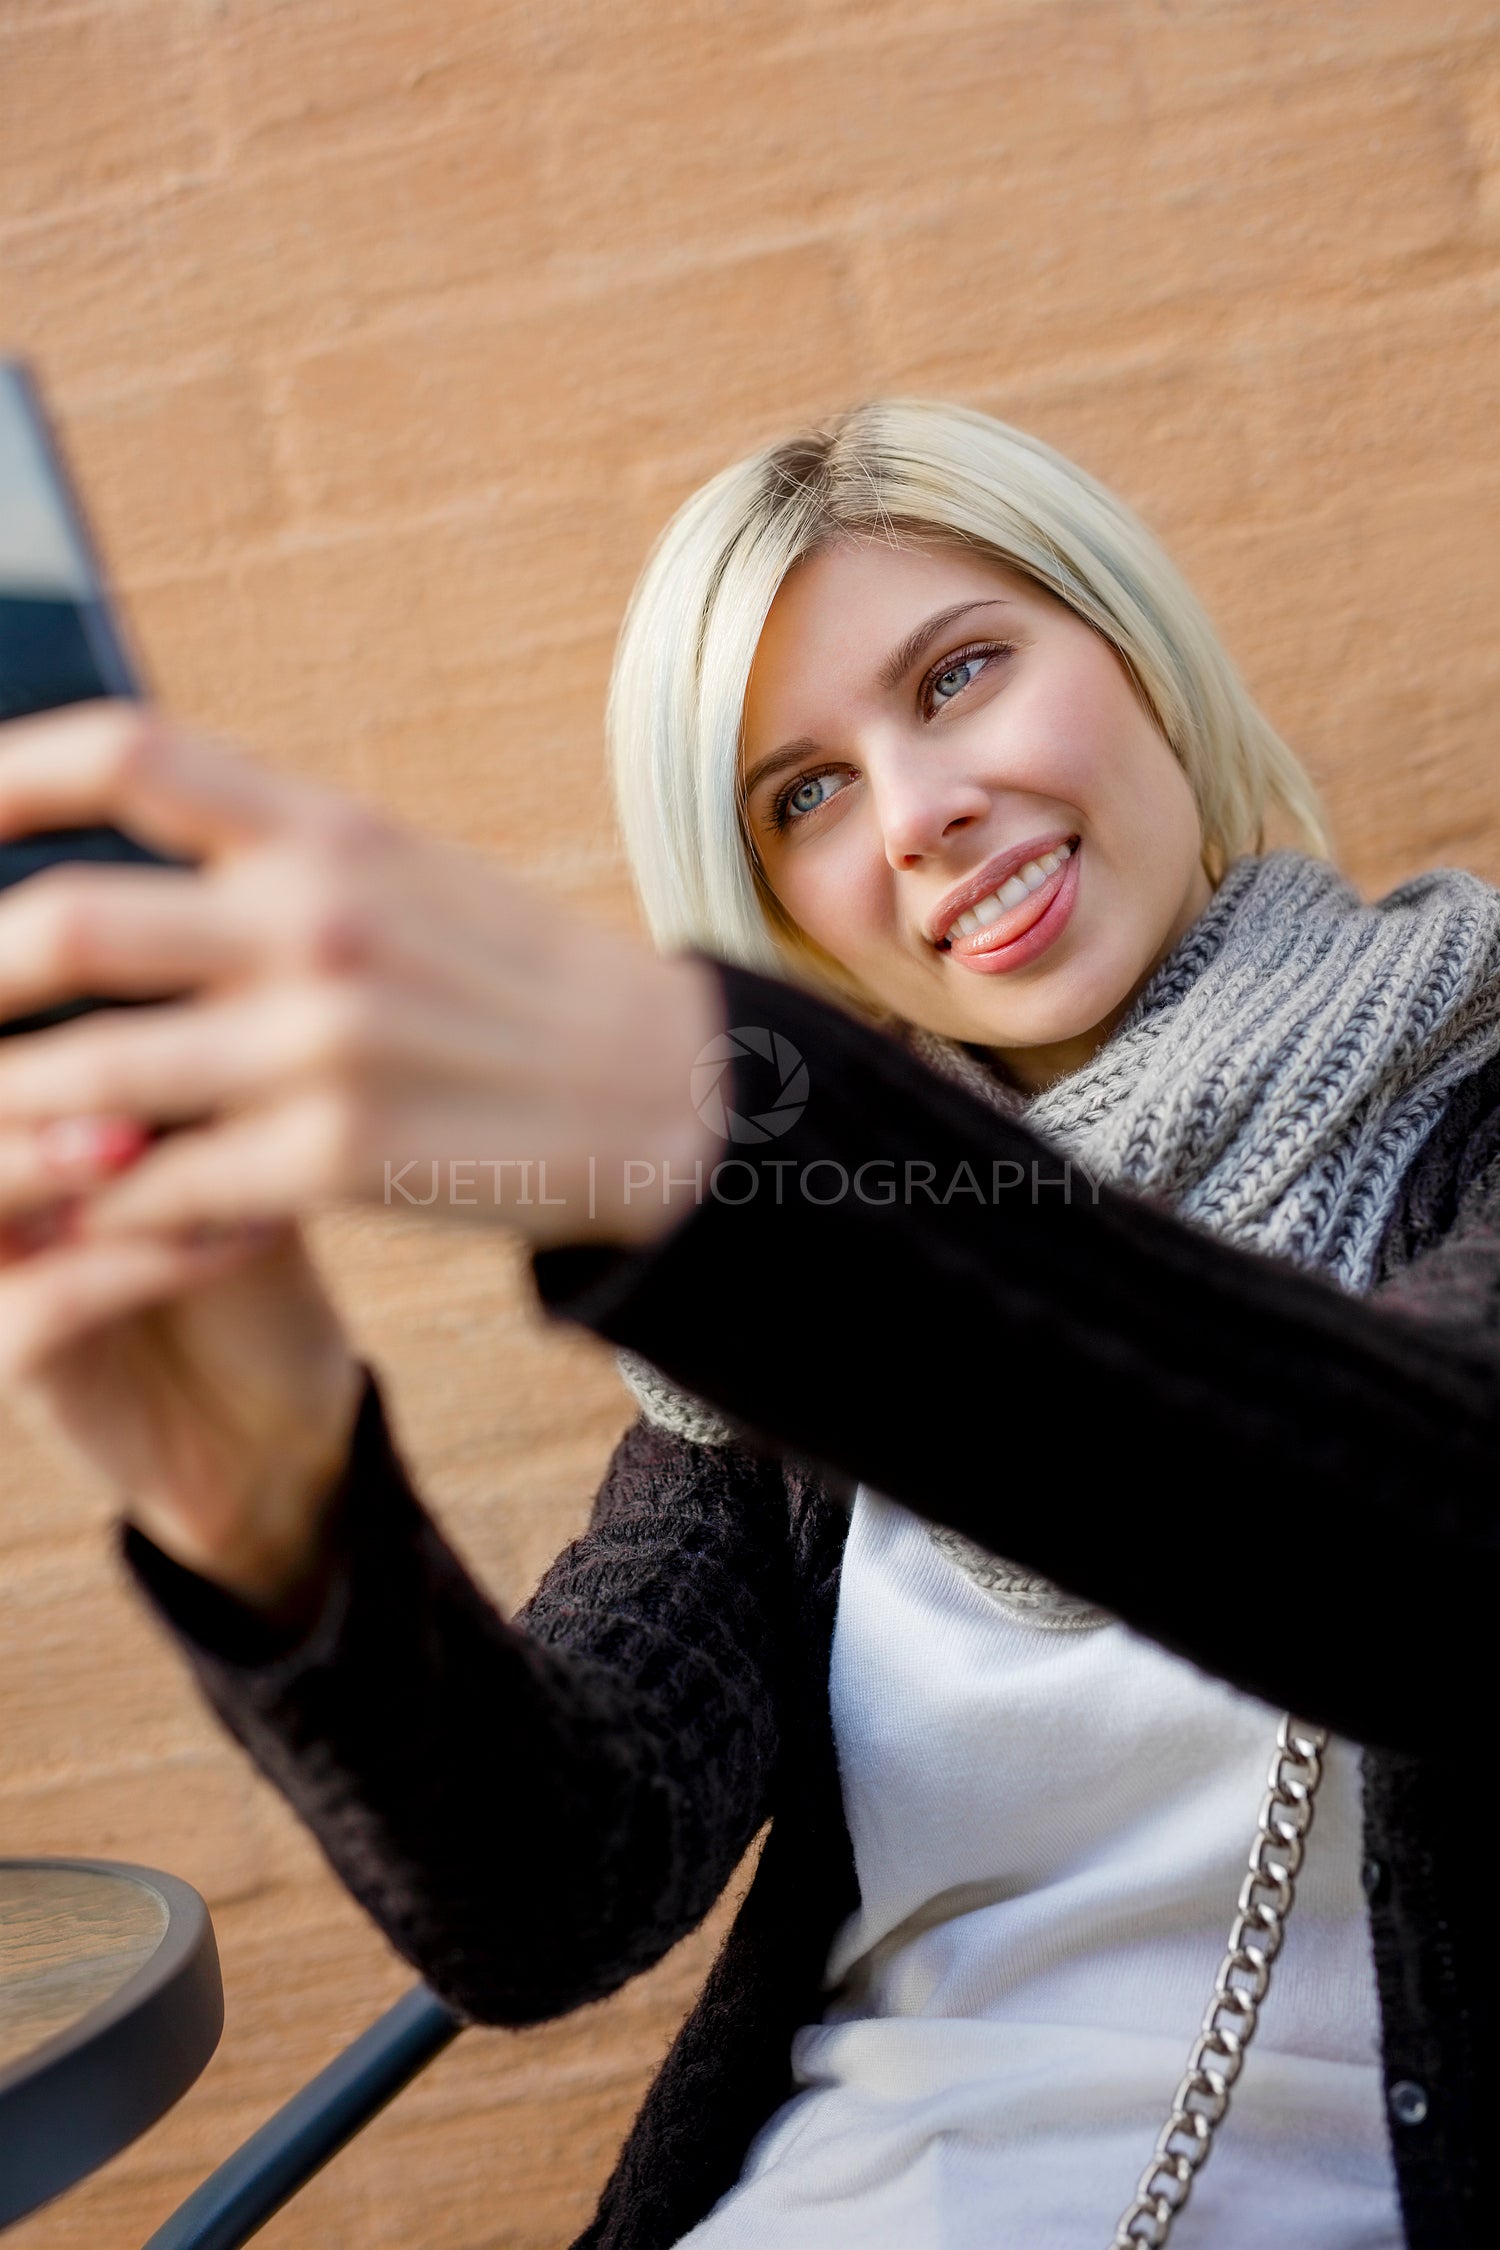 Woman Making Faces While Taking Selfie At Outdoor Cafe